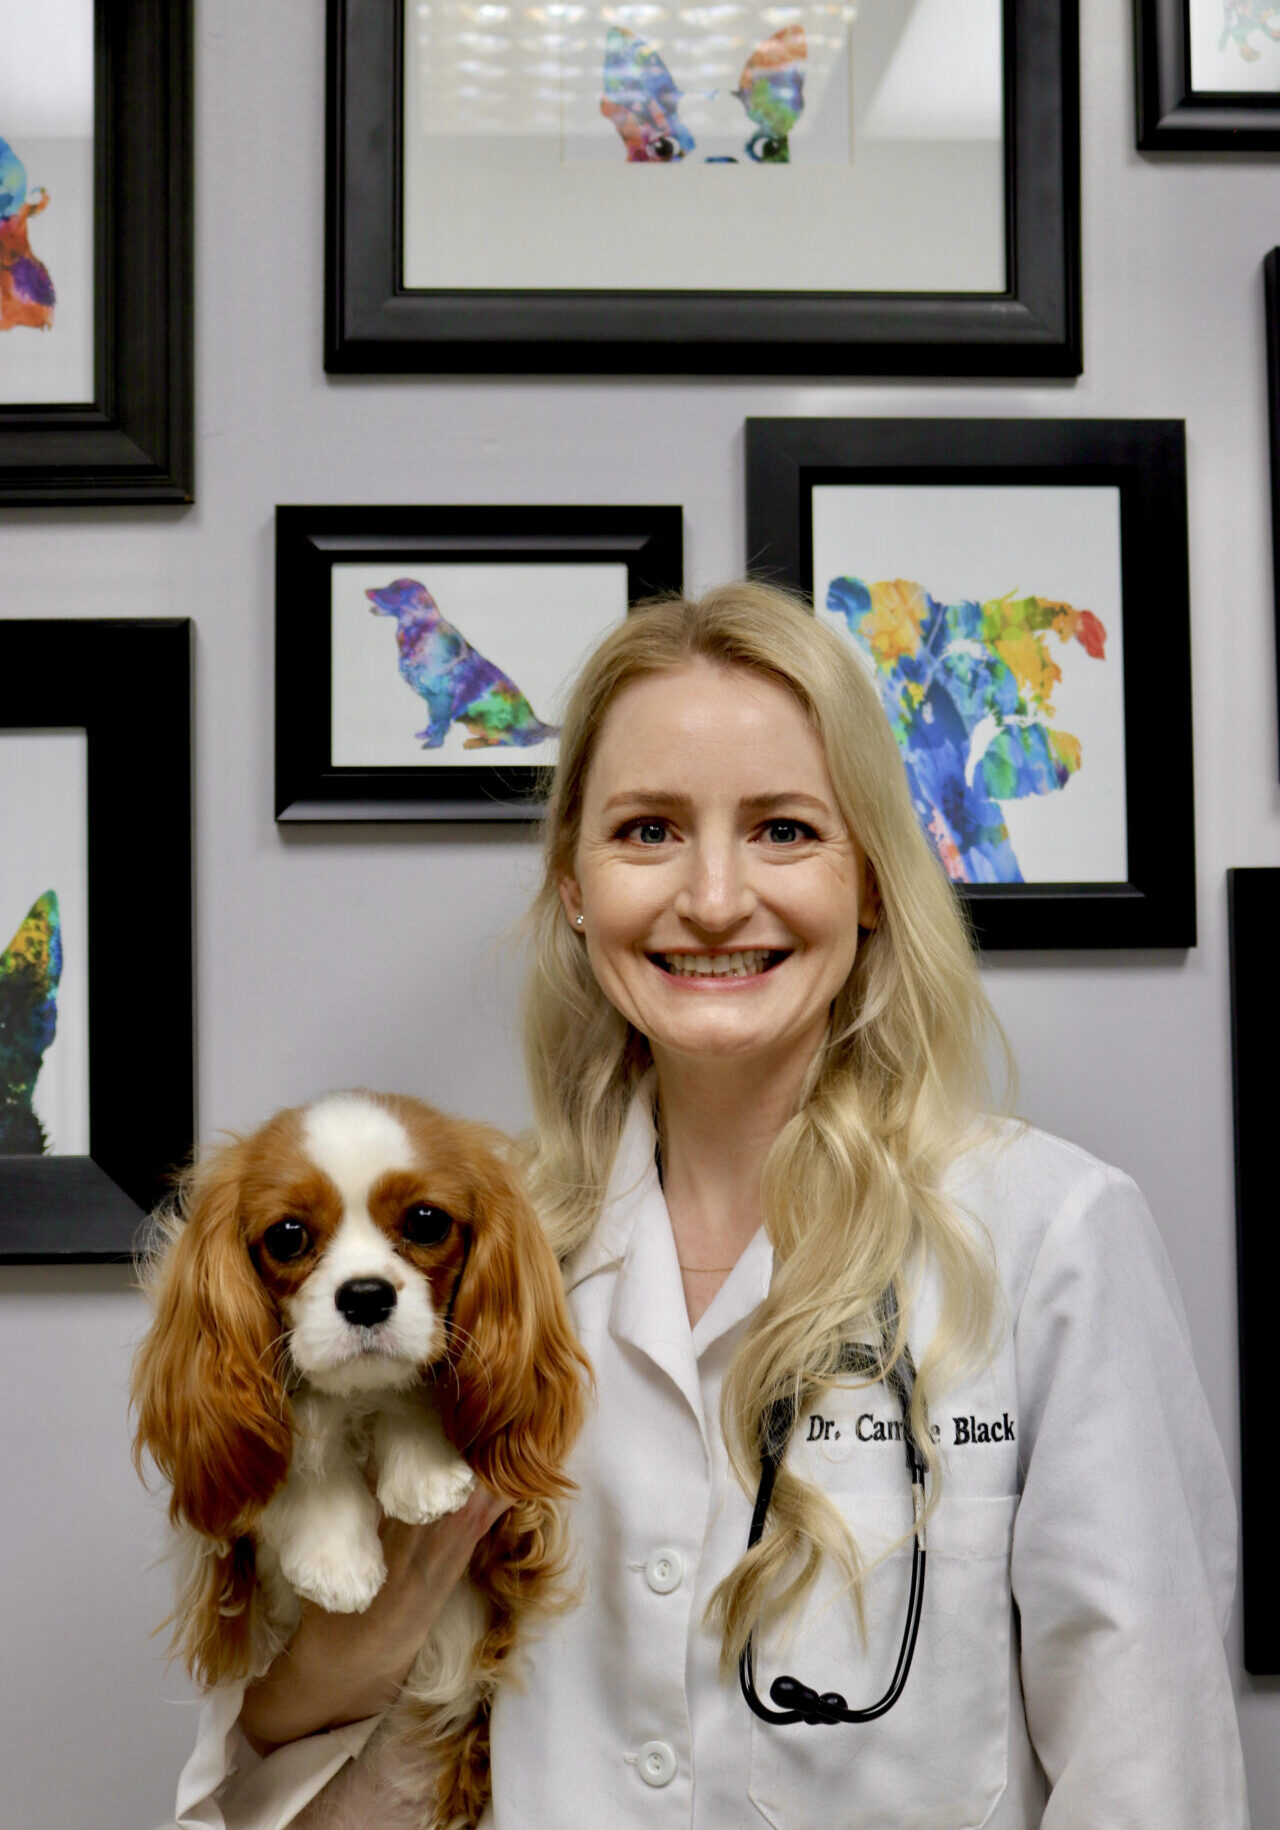 A woman standing next to a dog in front of some pictures.